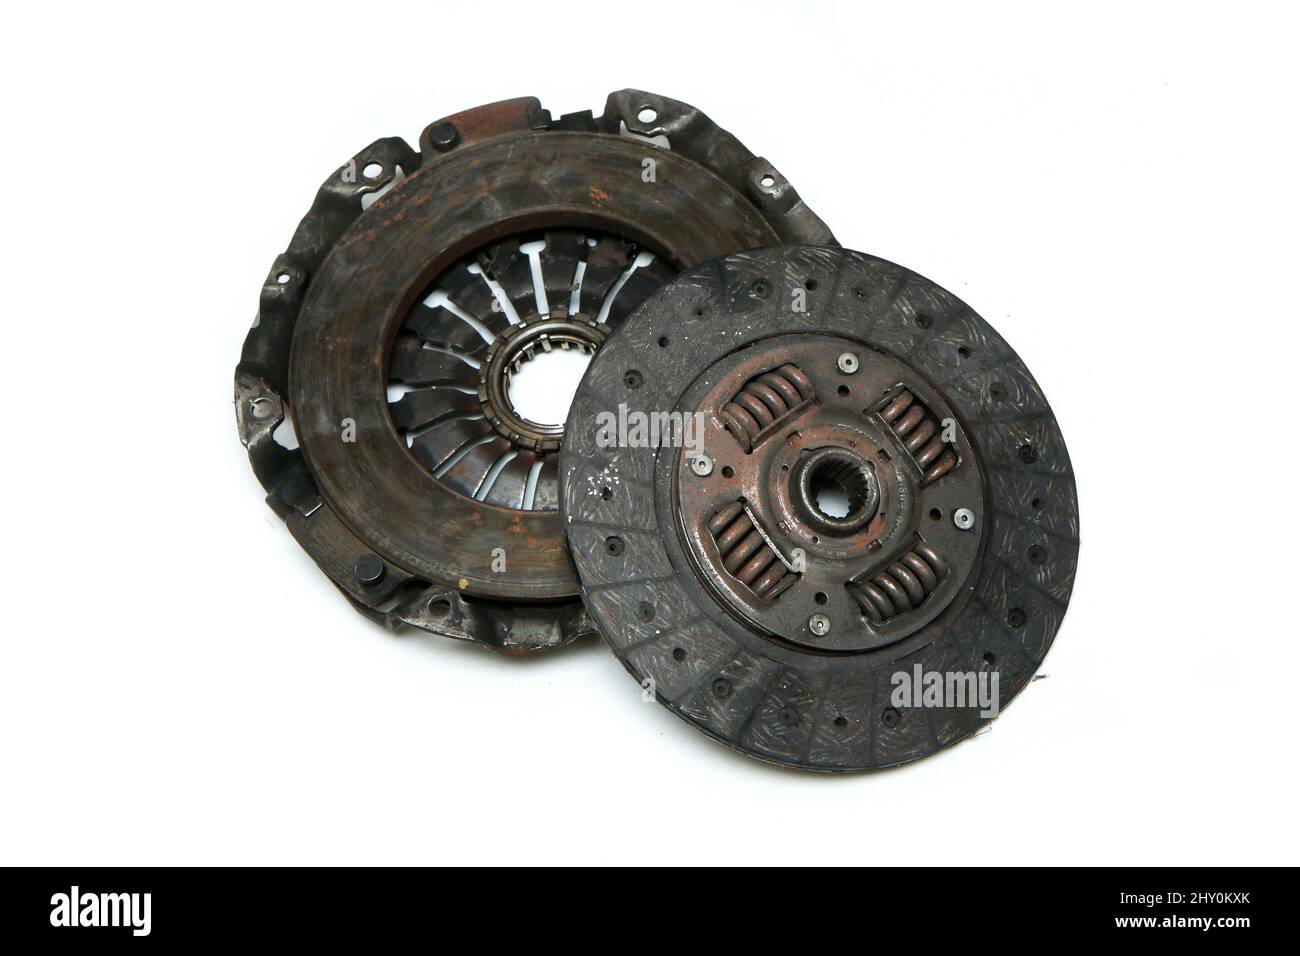 The old rusty used clutch from the car engine isolated in a white background. Has to be changed for new one. Stock Photo